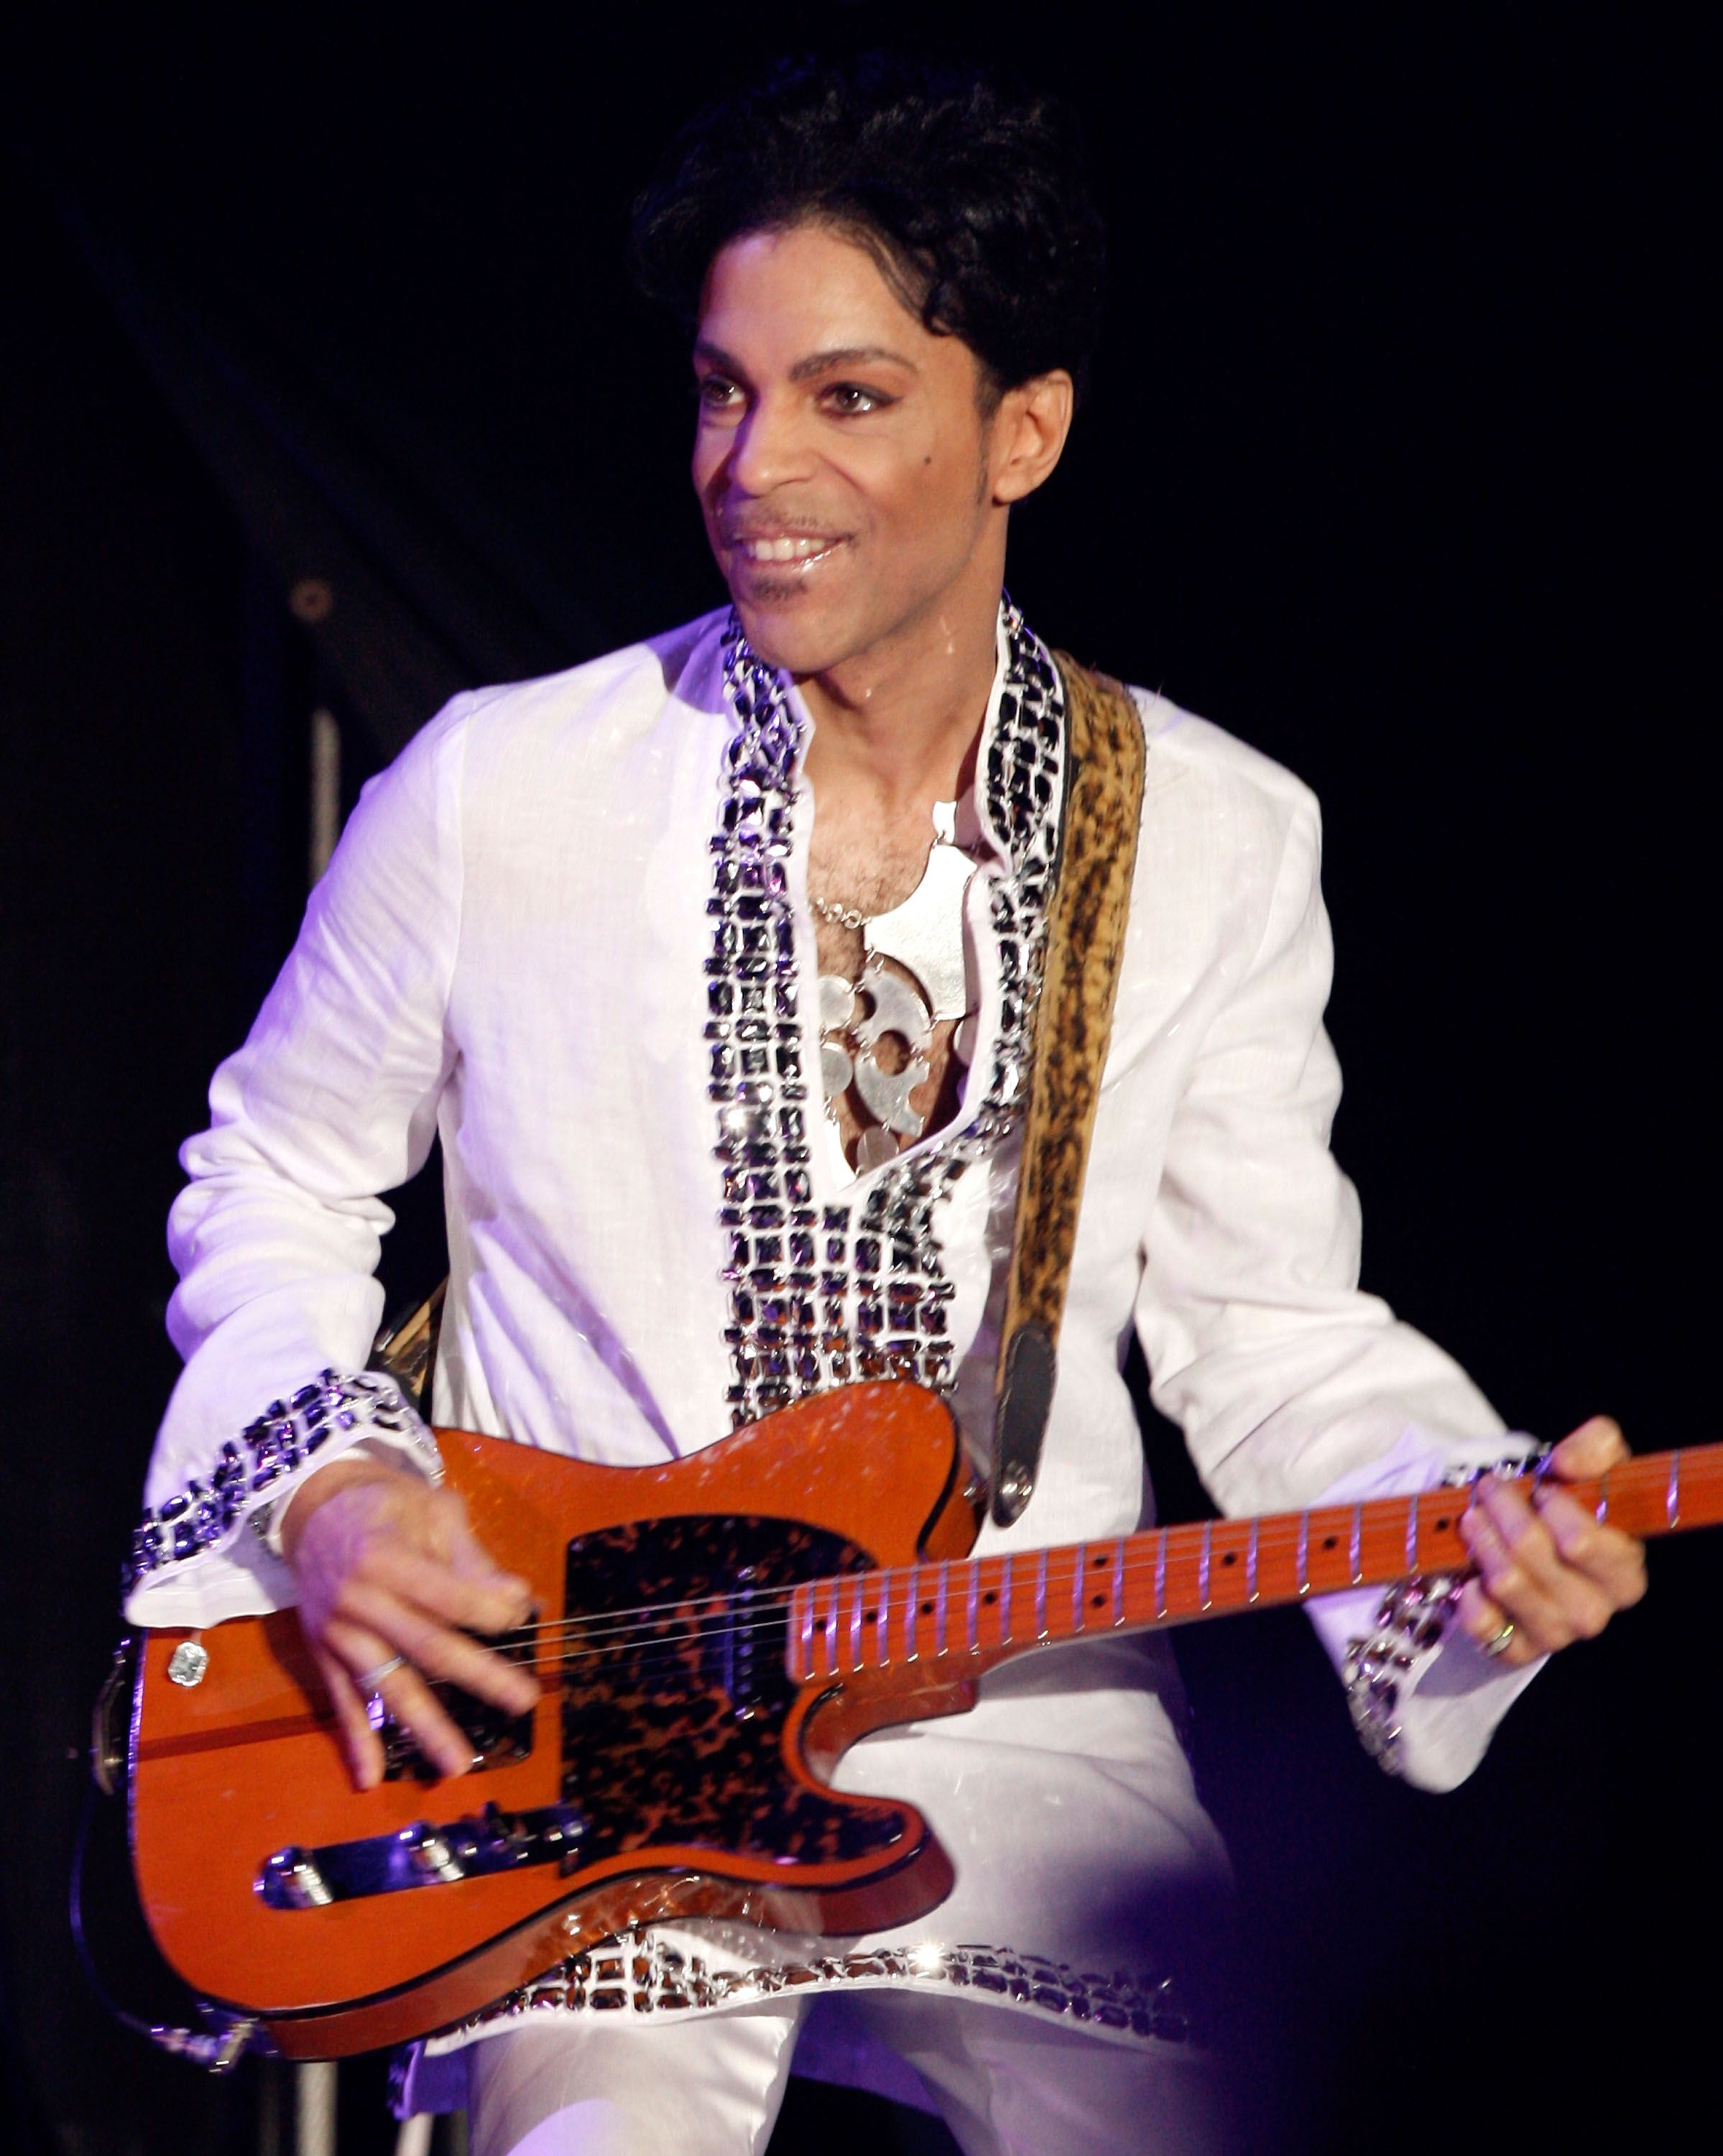 Prince performing at the Coachella Valley Music and Arts Festival on April 26, 2008, in Indio, California | Photo: Kevin Winter/Getty Images